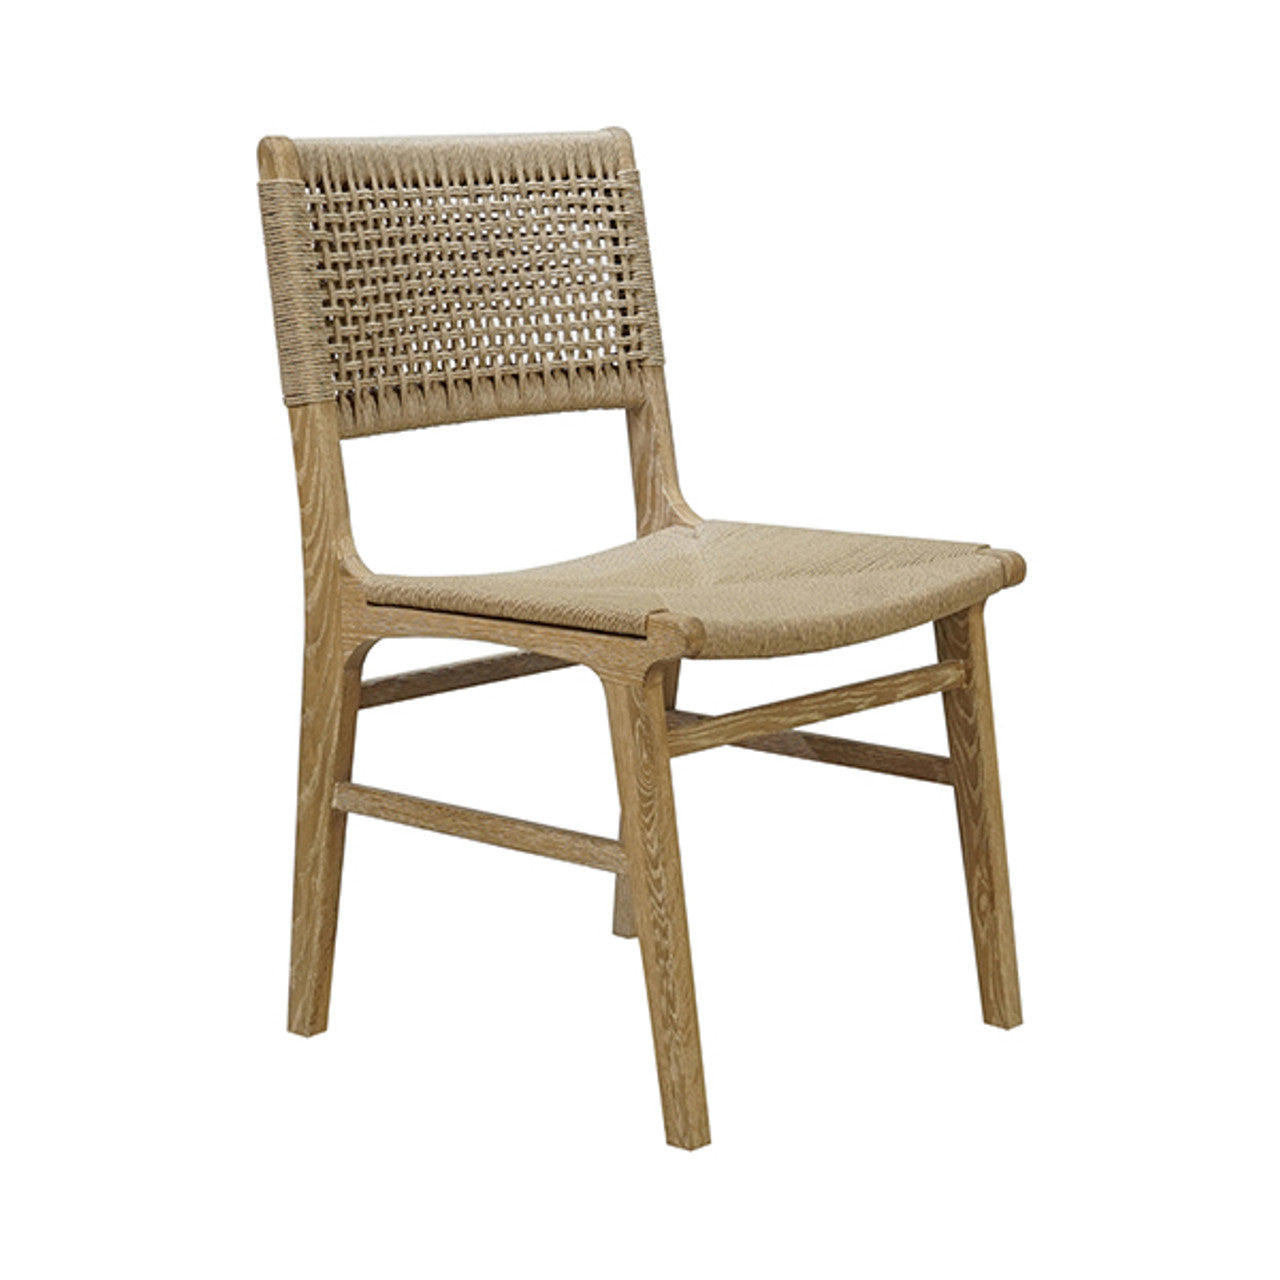 DINING CHAIR SQUARE BACK WOVEN